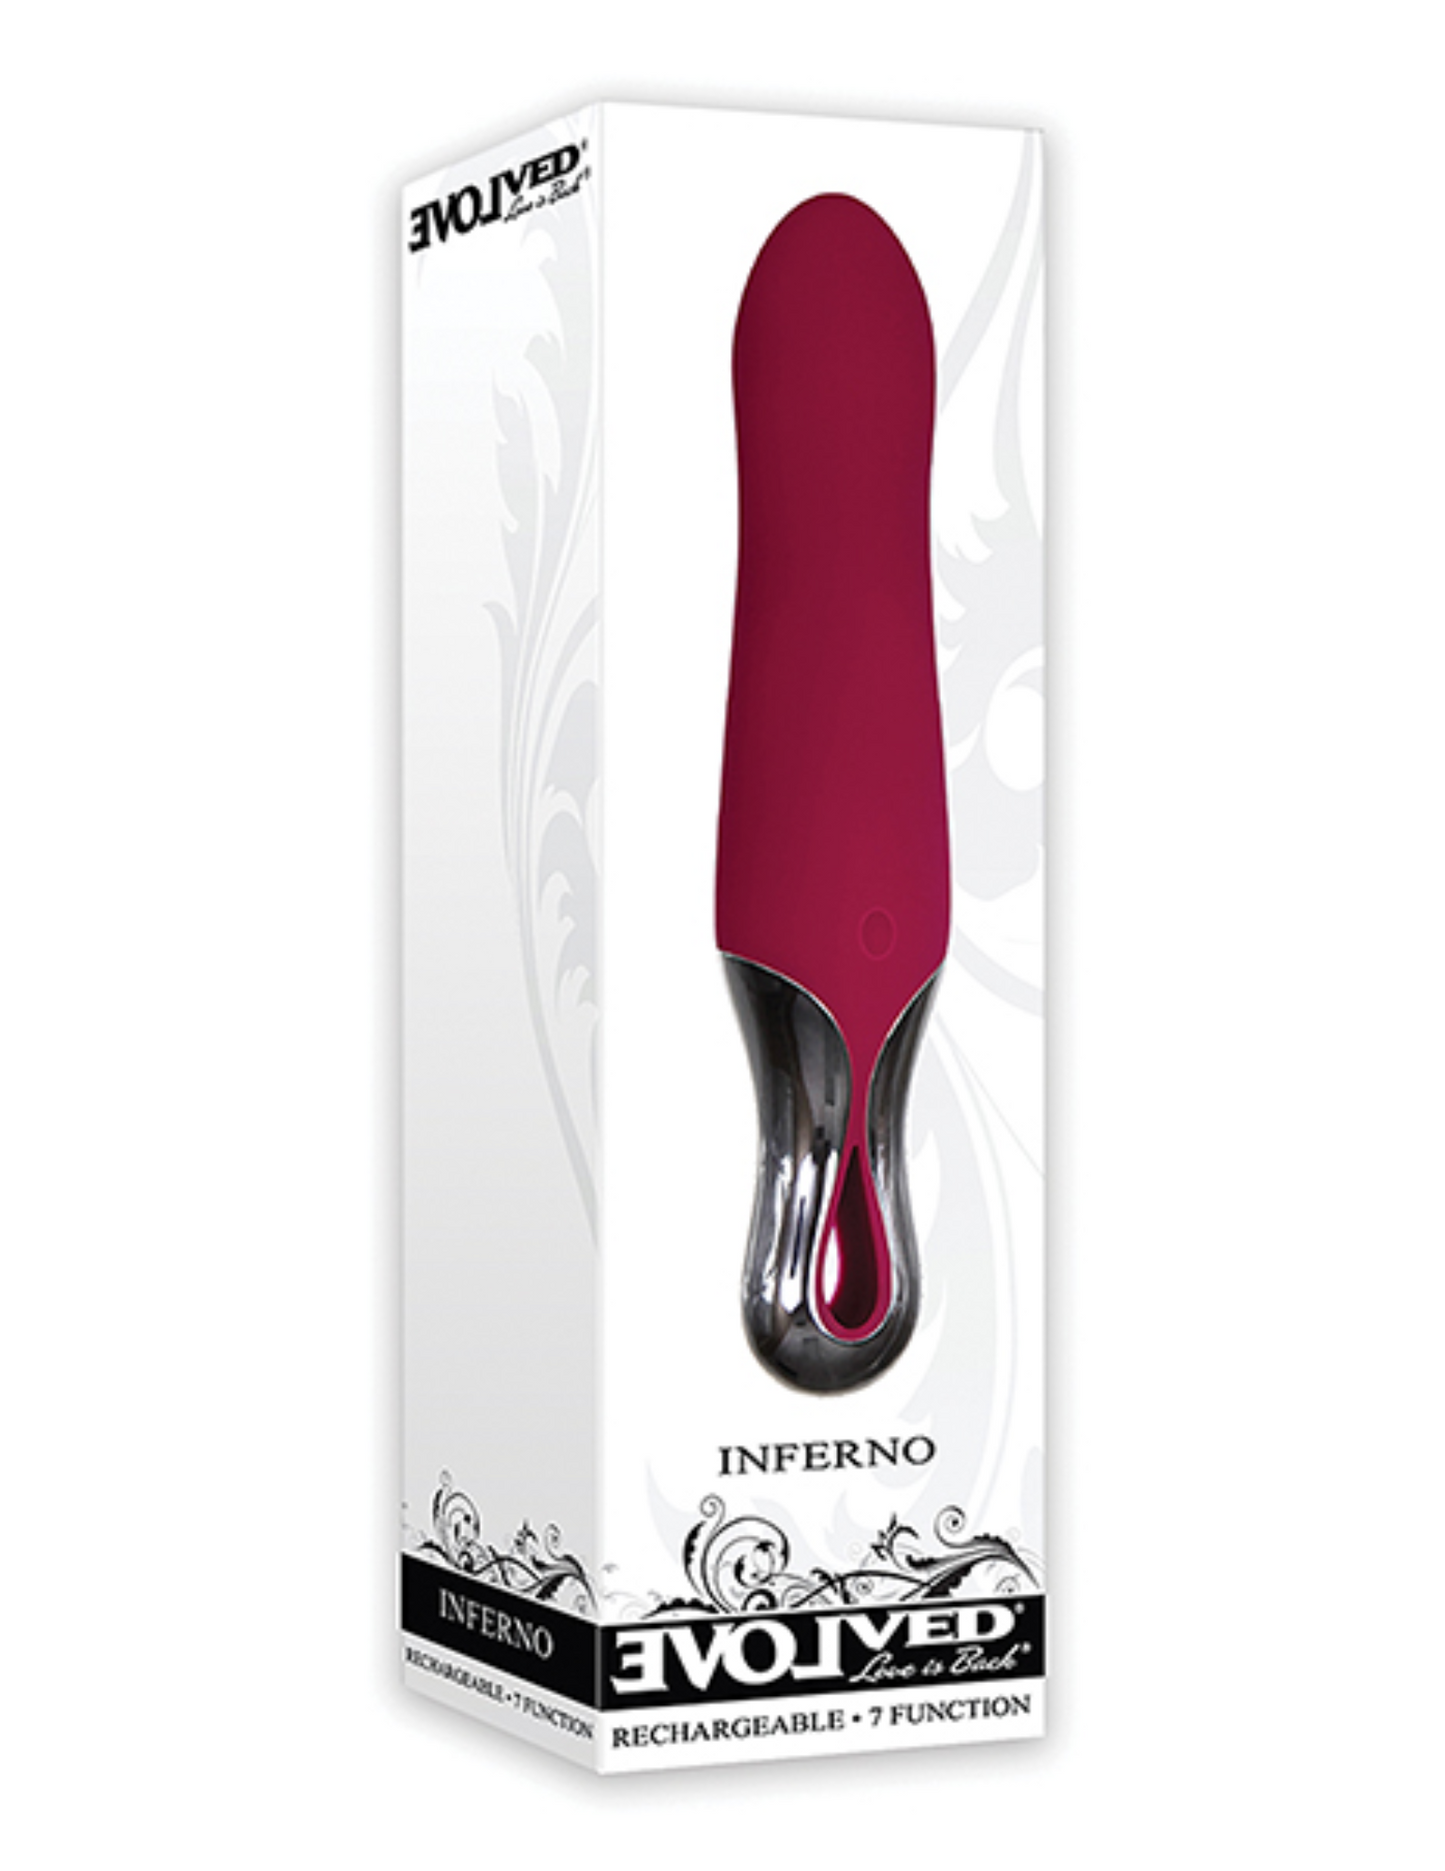 Photo of the front of the box for the Inferno Mini Vibrator from Evolved Novelties.